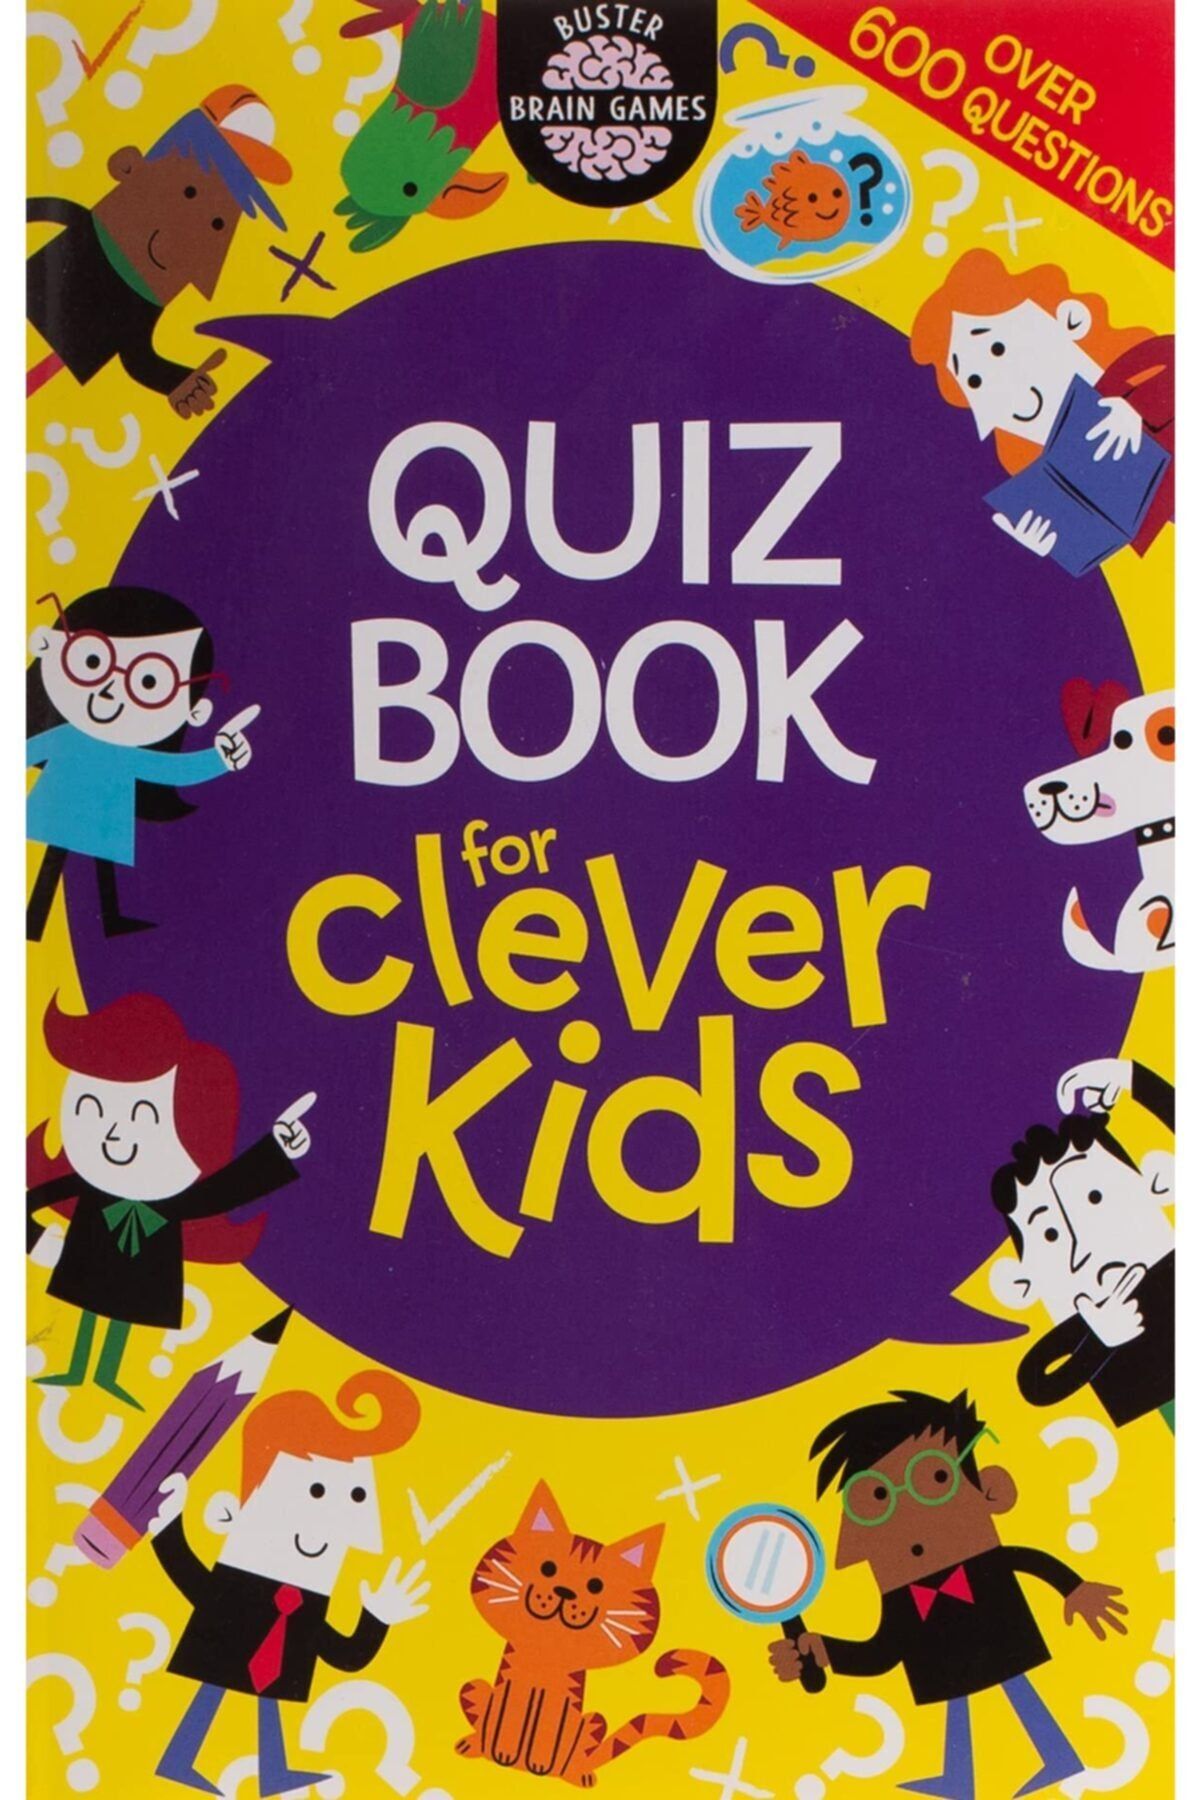 BUSTER BOOKS Brain Games For Clever Kids - Quiz Book For Clever Kids